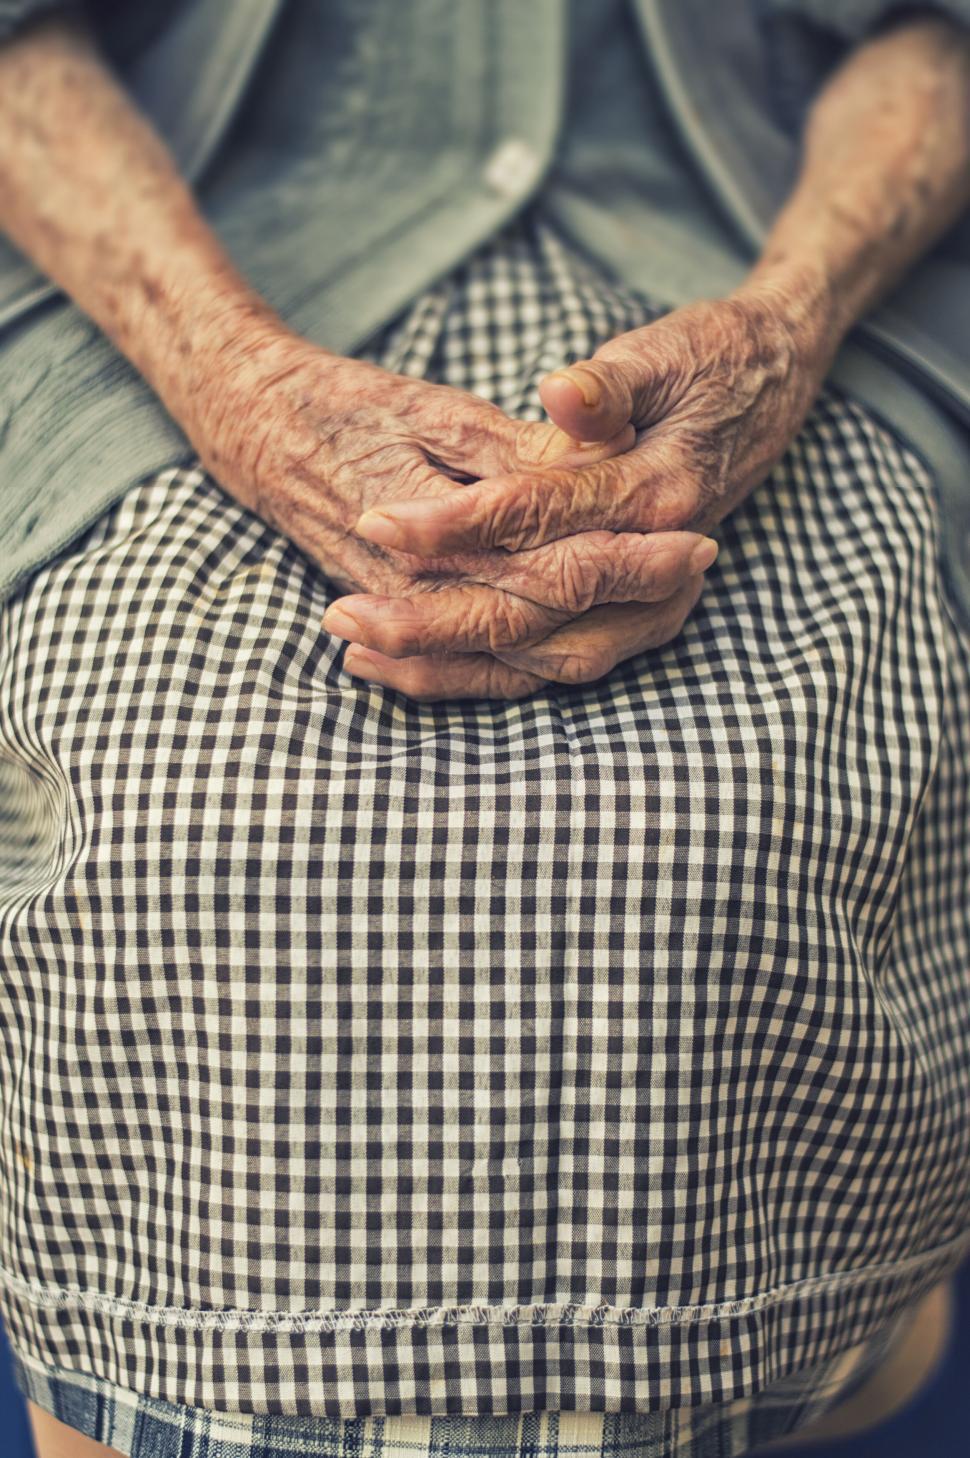 Free Image of Elderly hands resting on a checkered back 